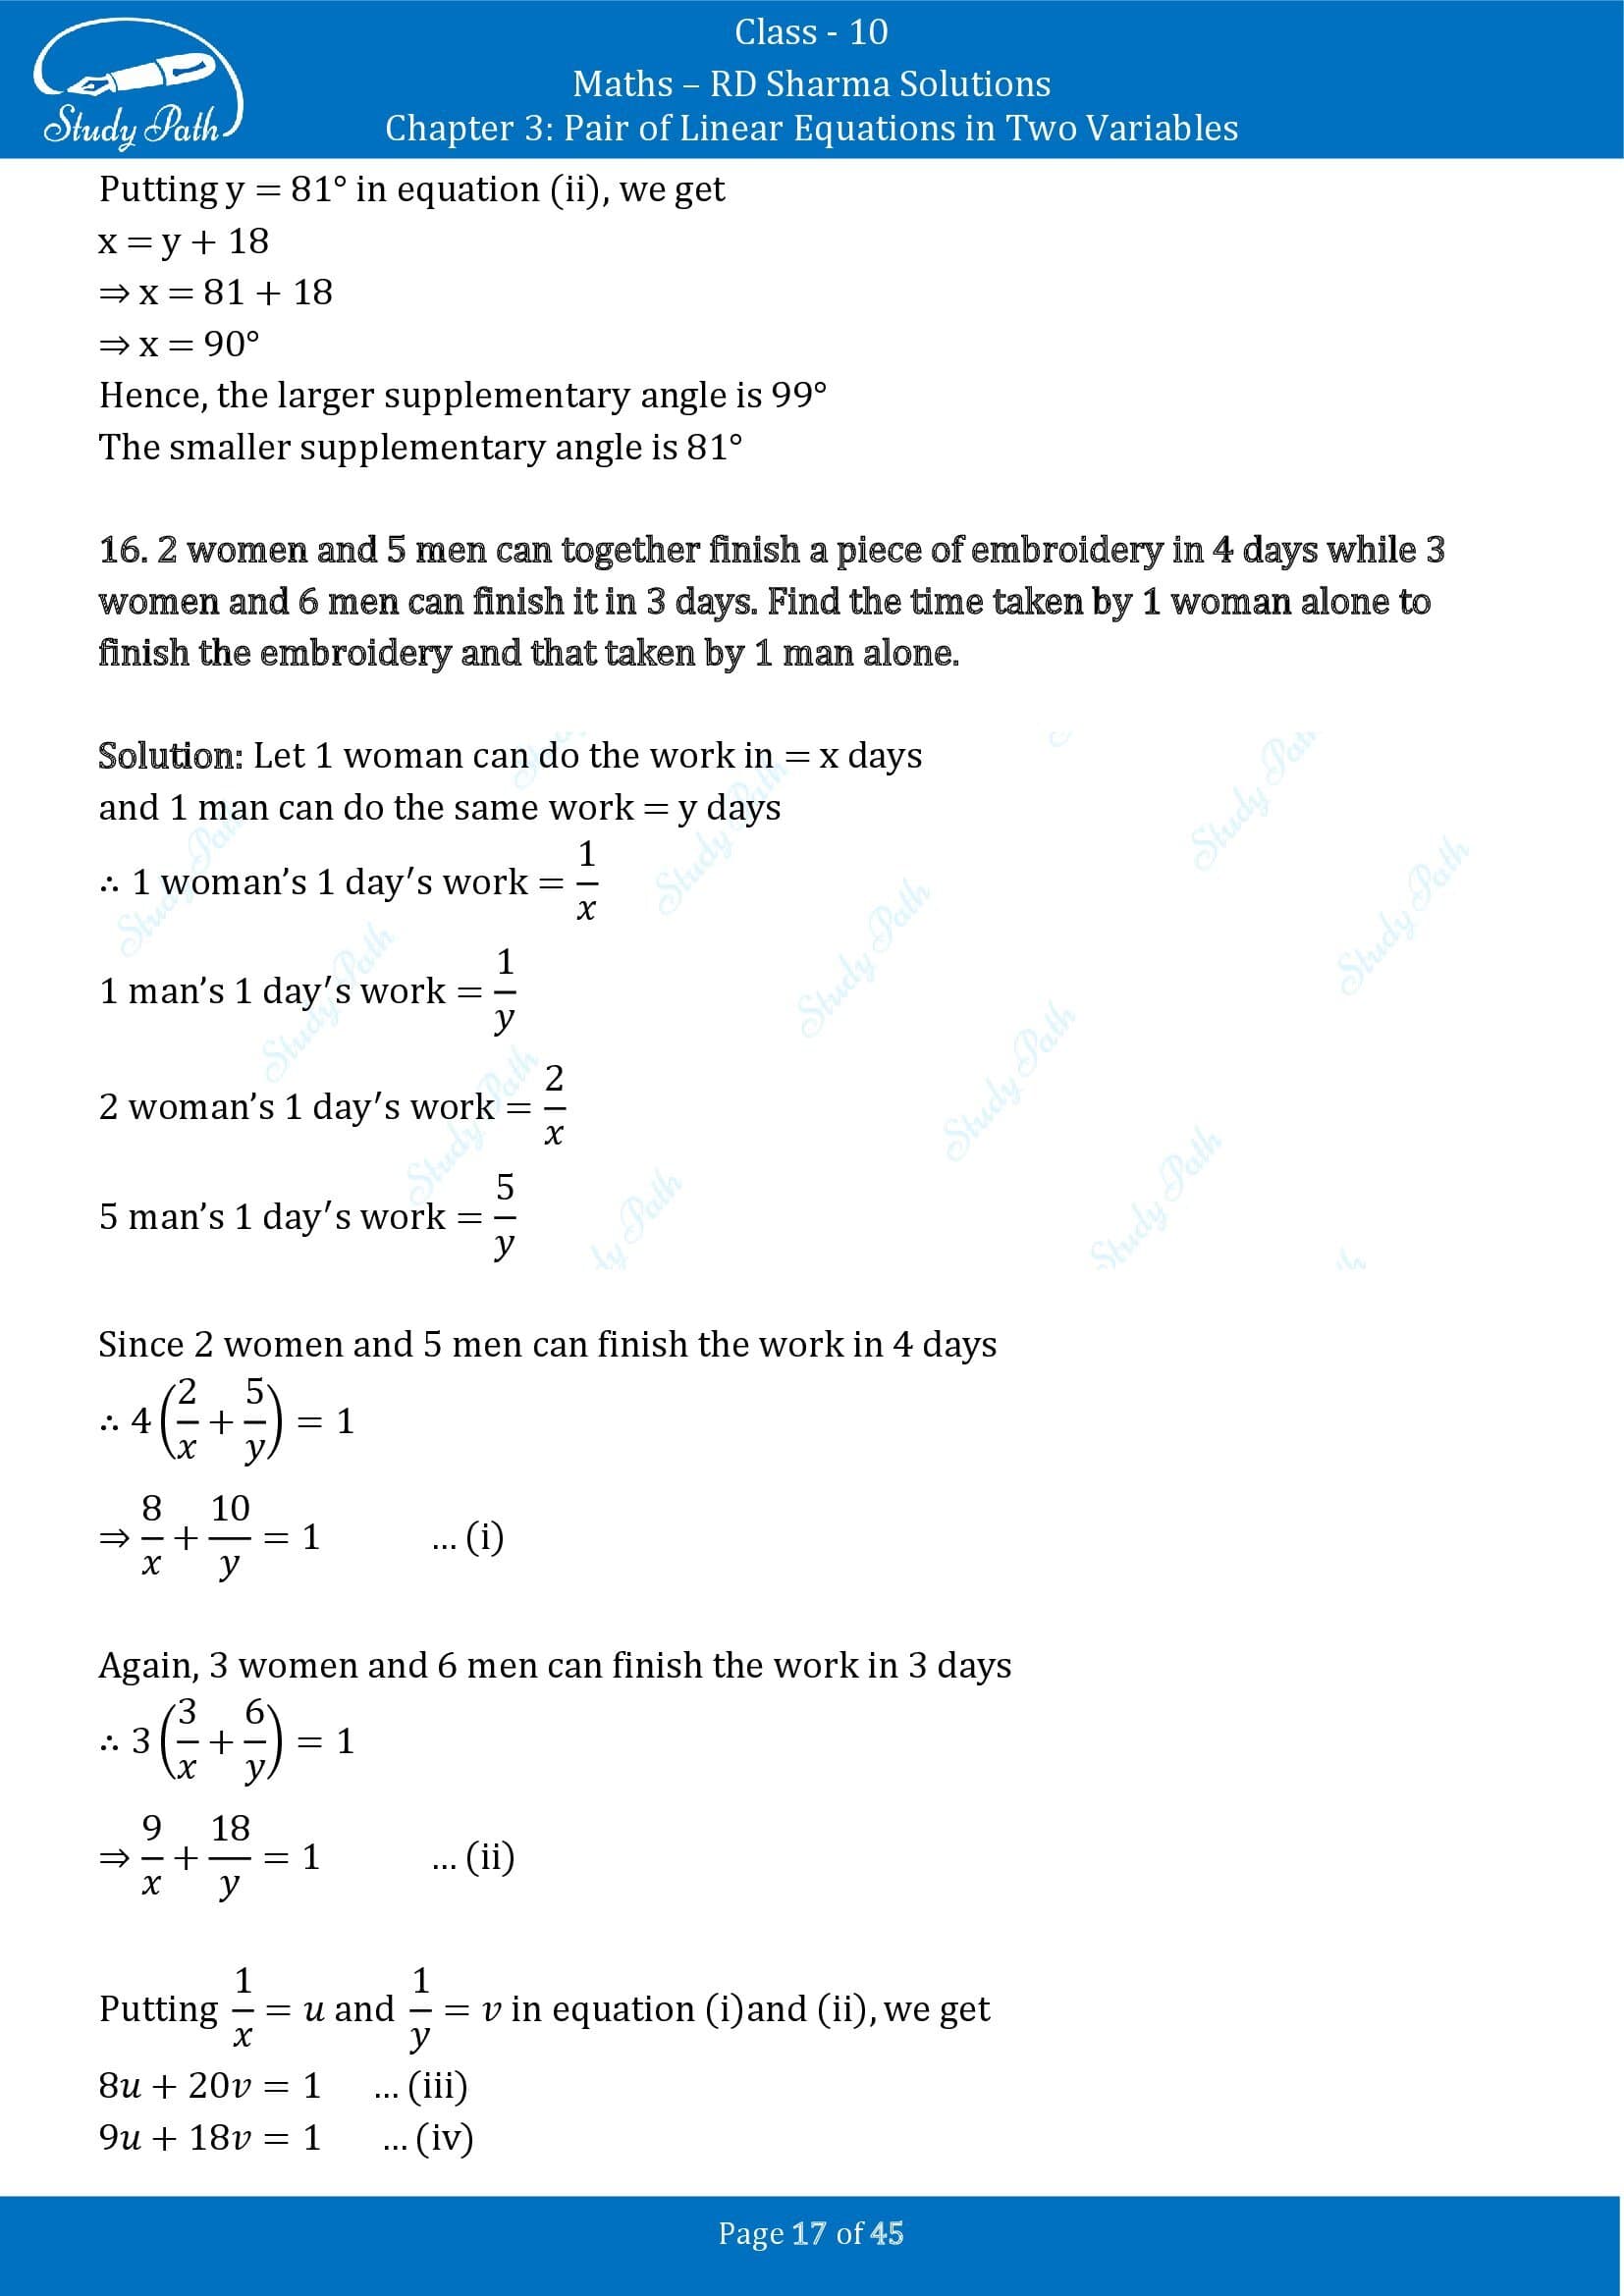 RD Sharma Solutions Class 10 Chapter 3 Pair of Linear Equations in Two Variables Exercise 3.11 00017